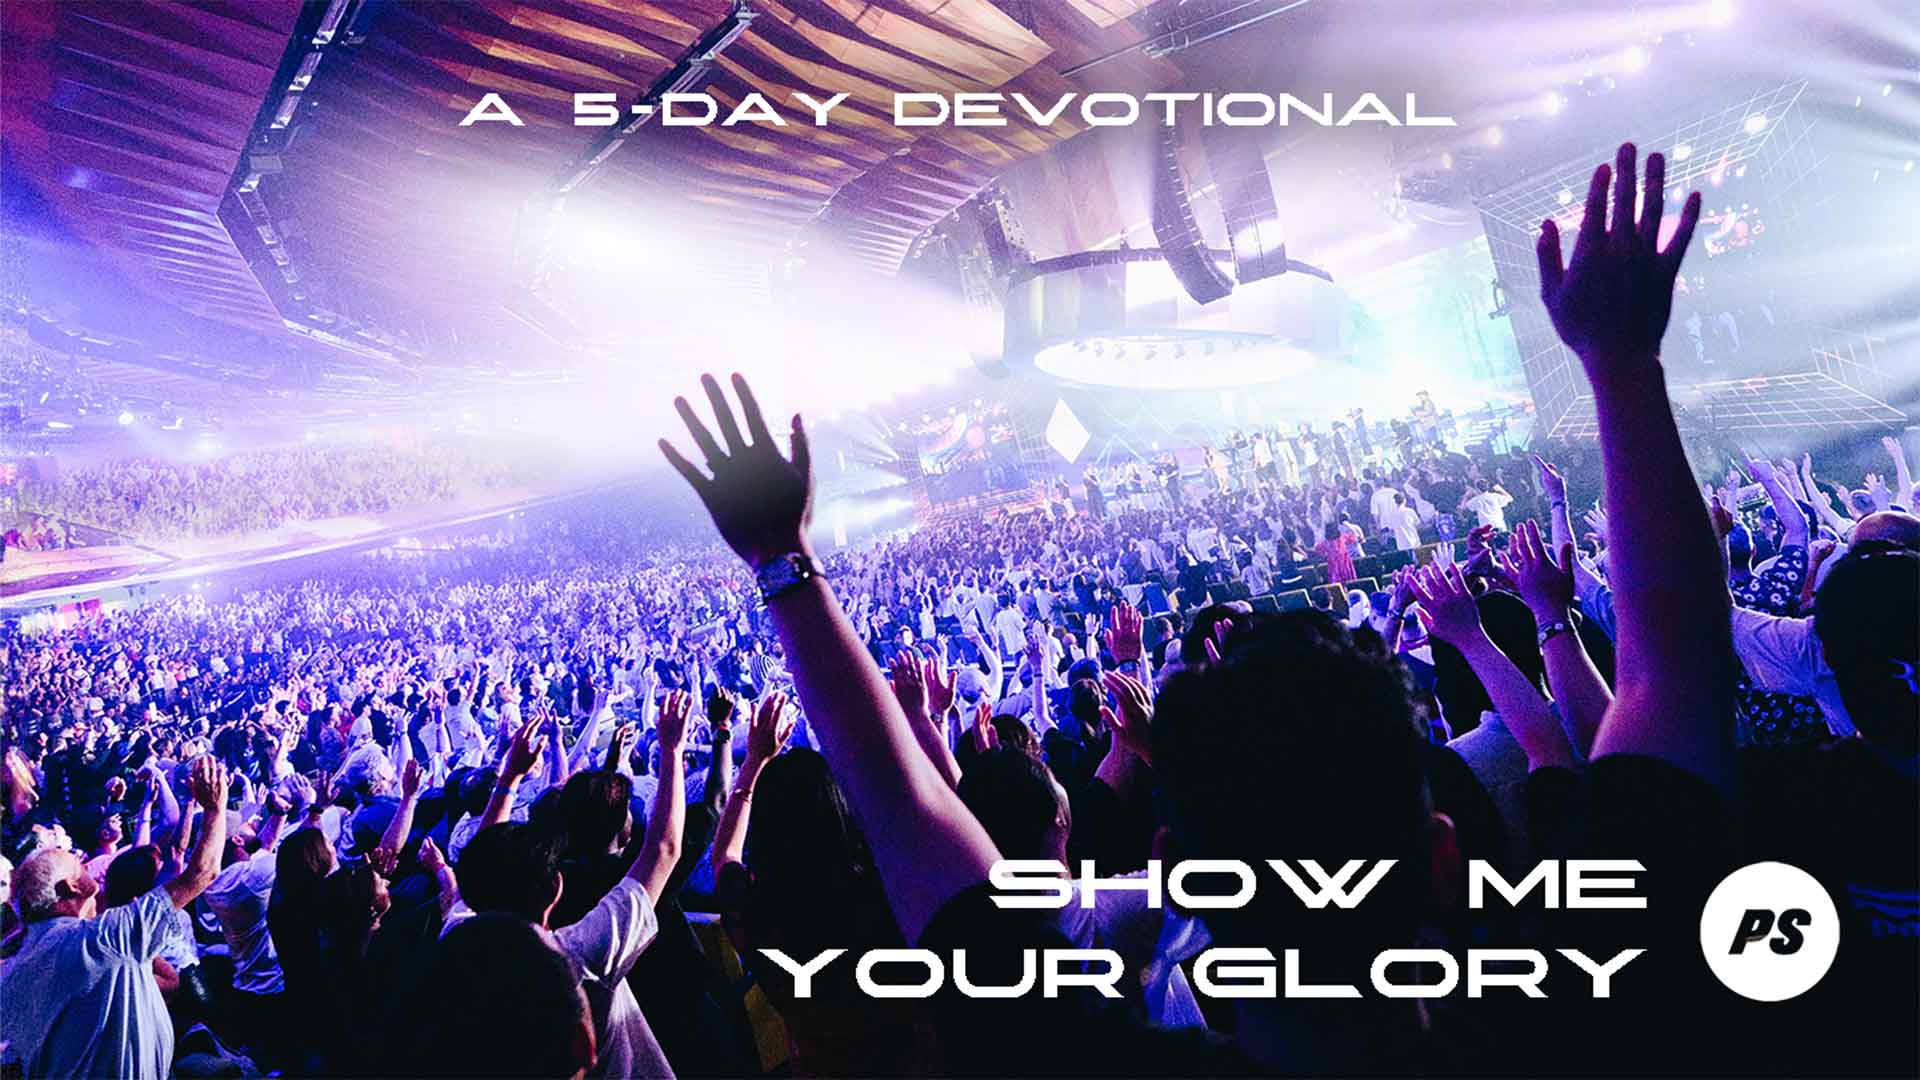 Featured Image for “Show Me Your Glory 5 Day Devotional"